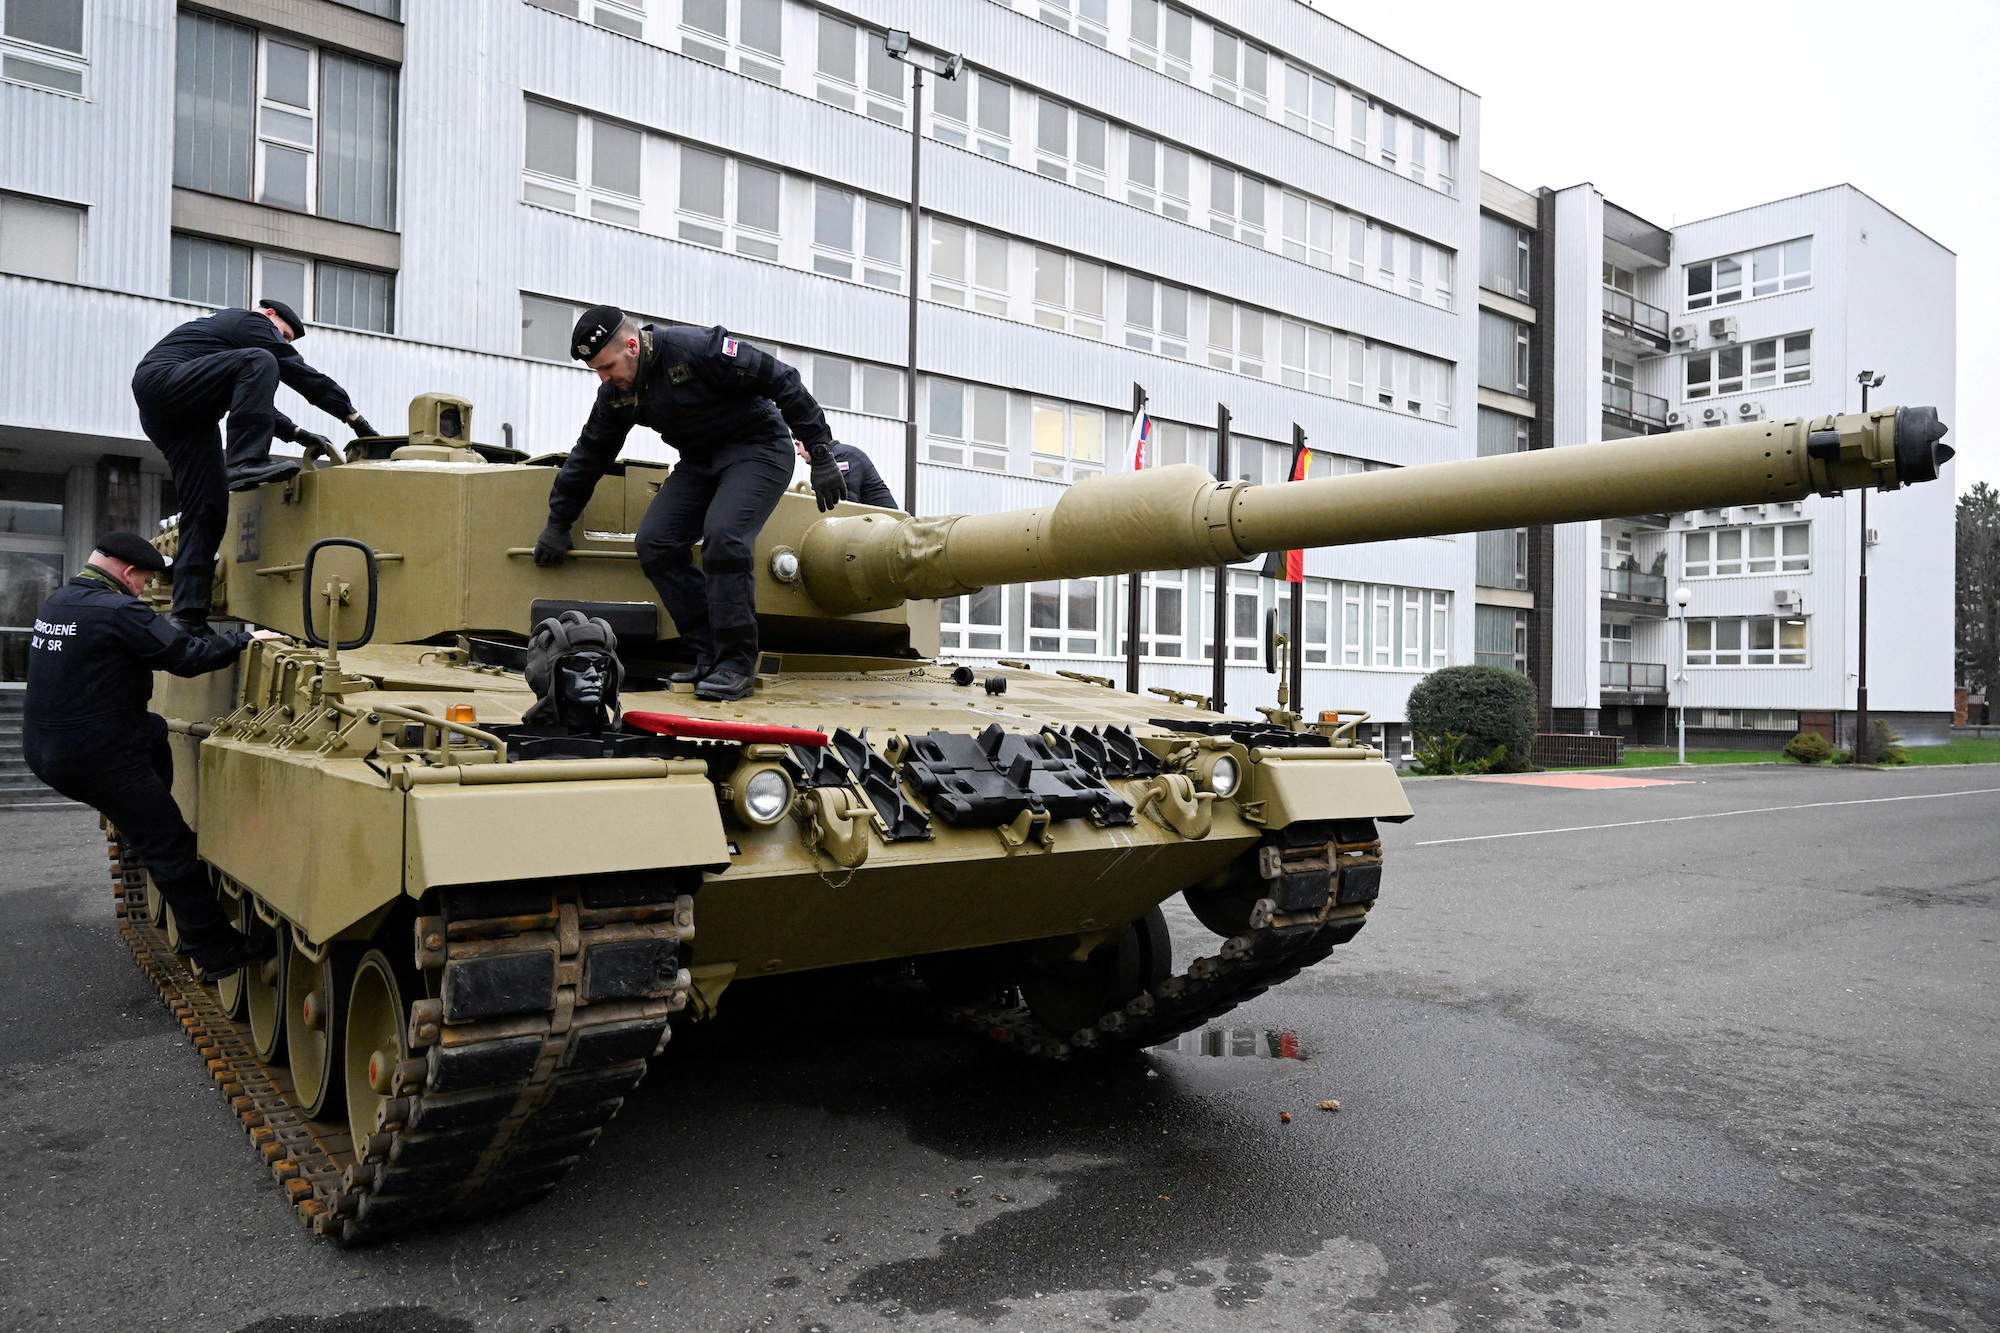 US "optimistic" that Germany will send Leopard tanks to Ukraine, defense official says